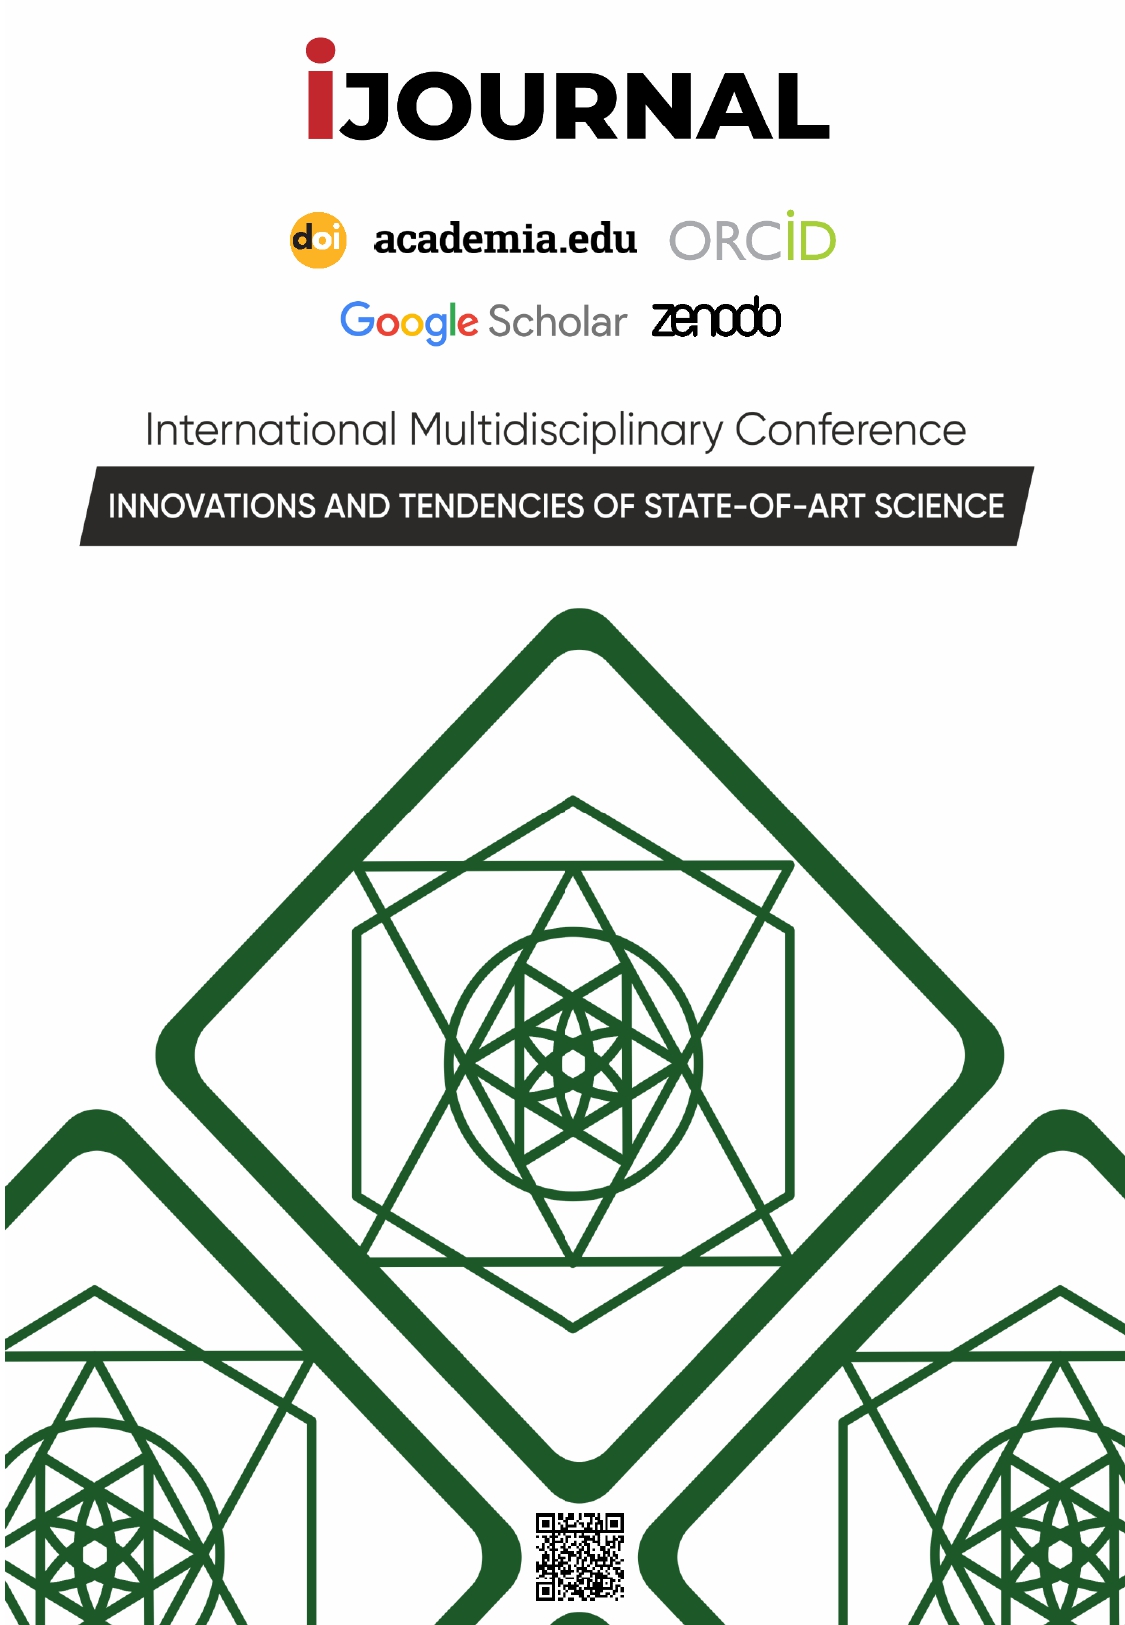 					View 2023: II International Multidisciplinary Conference “Innovations and Tendencies of State-of-Art Science”
				